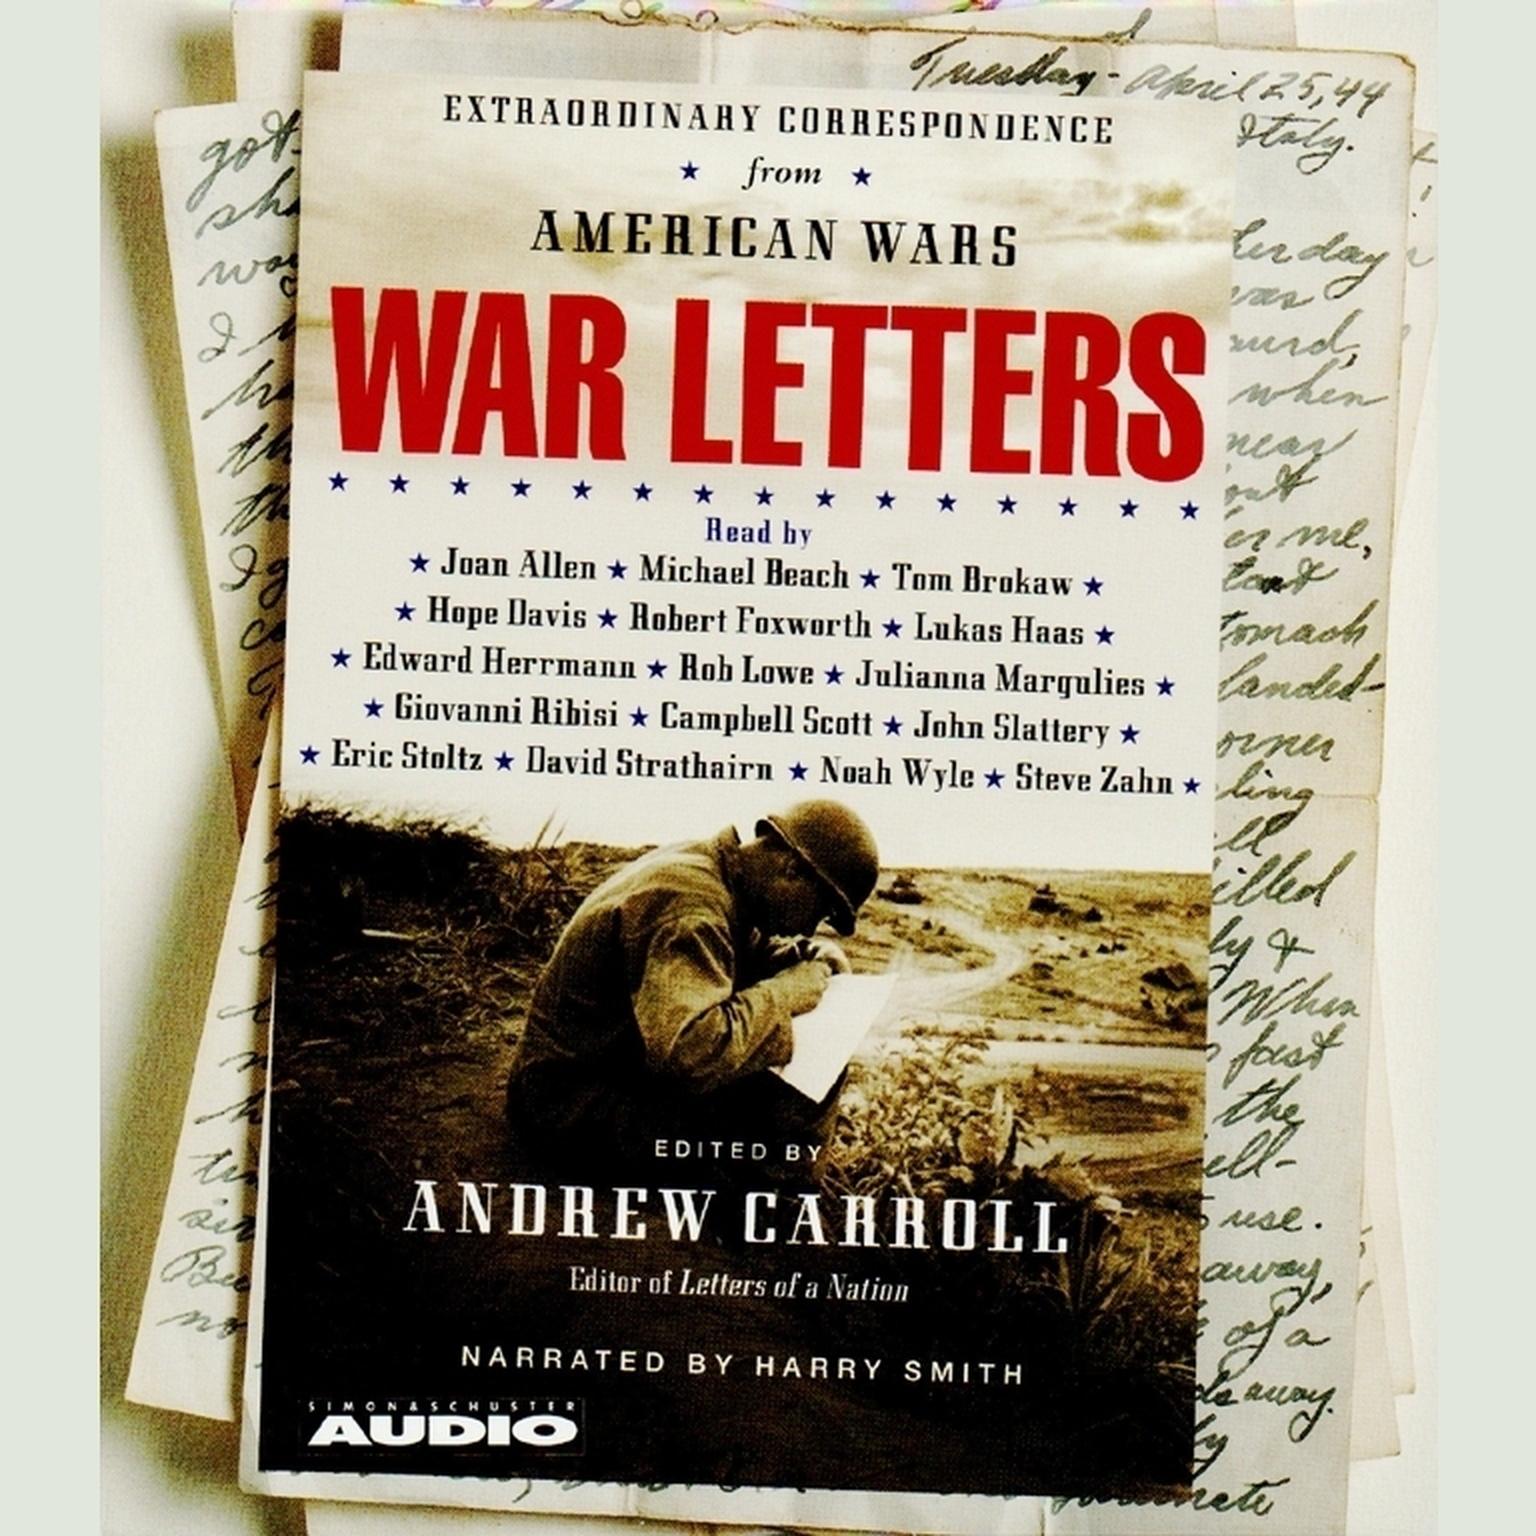 War Letters (Abridged): Extraordinary Correspondence from American Wars Audiobook, by Andrew Carroll